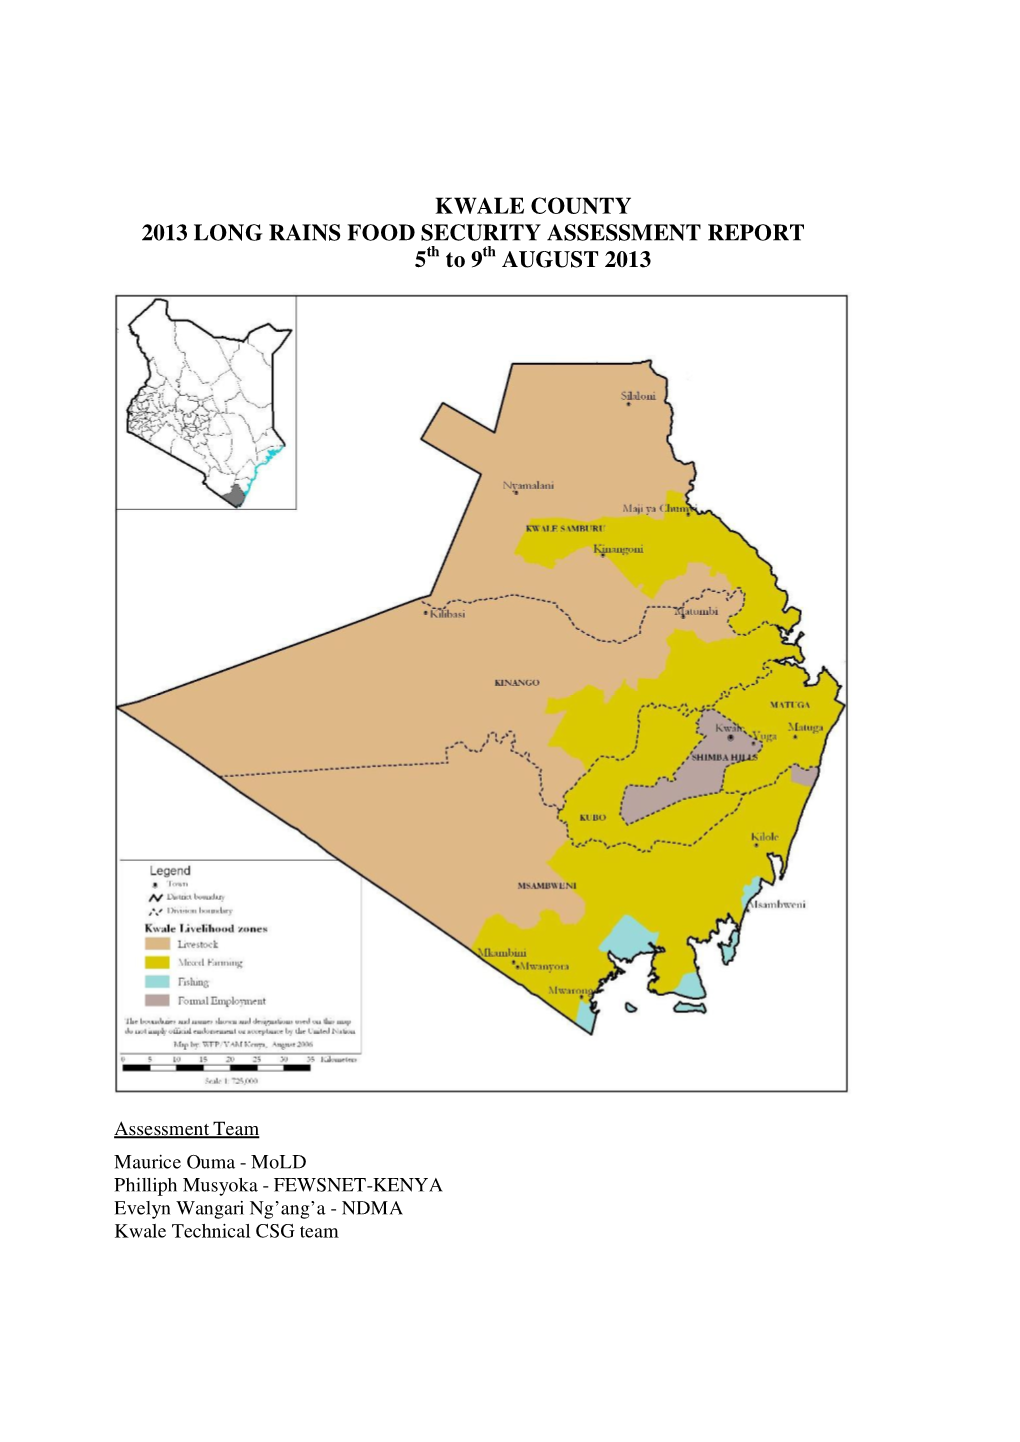 KWALE COUNTY 2013 LONG RAINS FOOD SECURITY ASSESSMENT REPORT 5Th to 9 Th AUGUST 2013